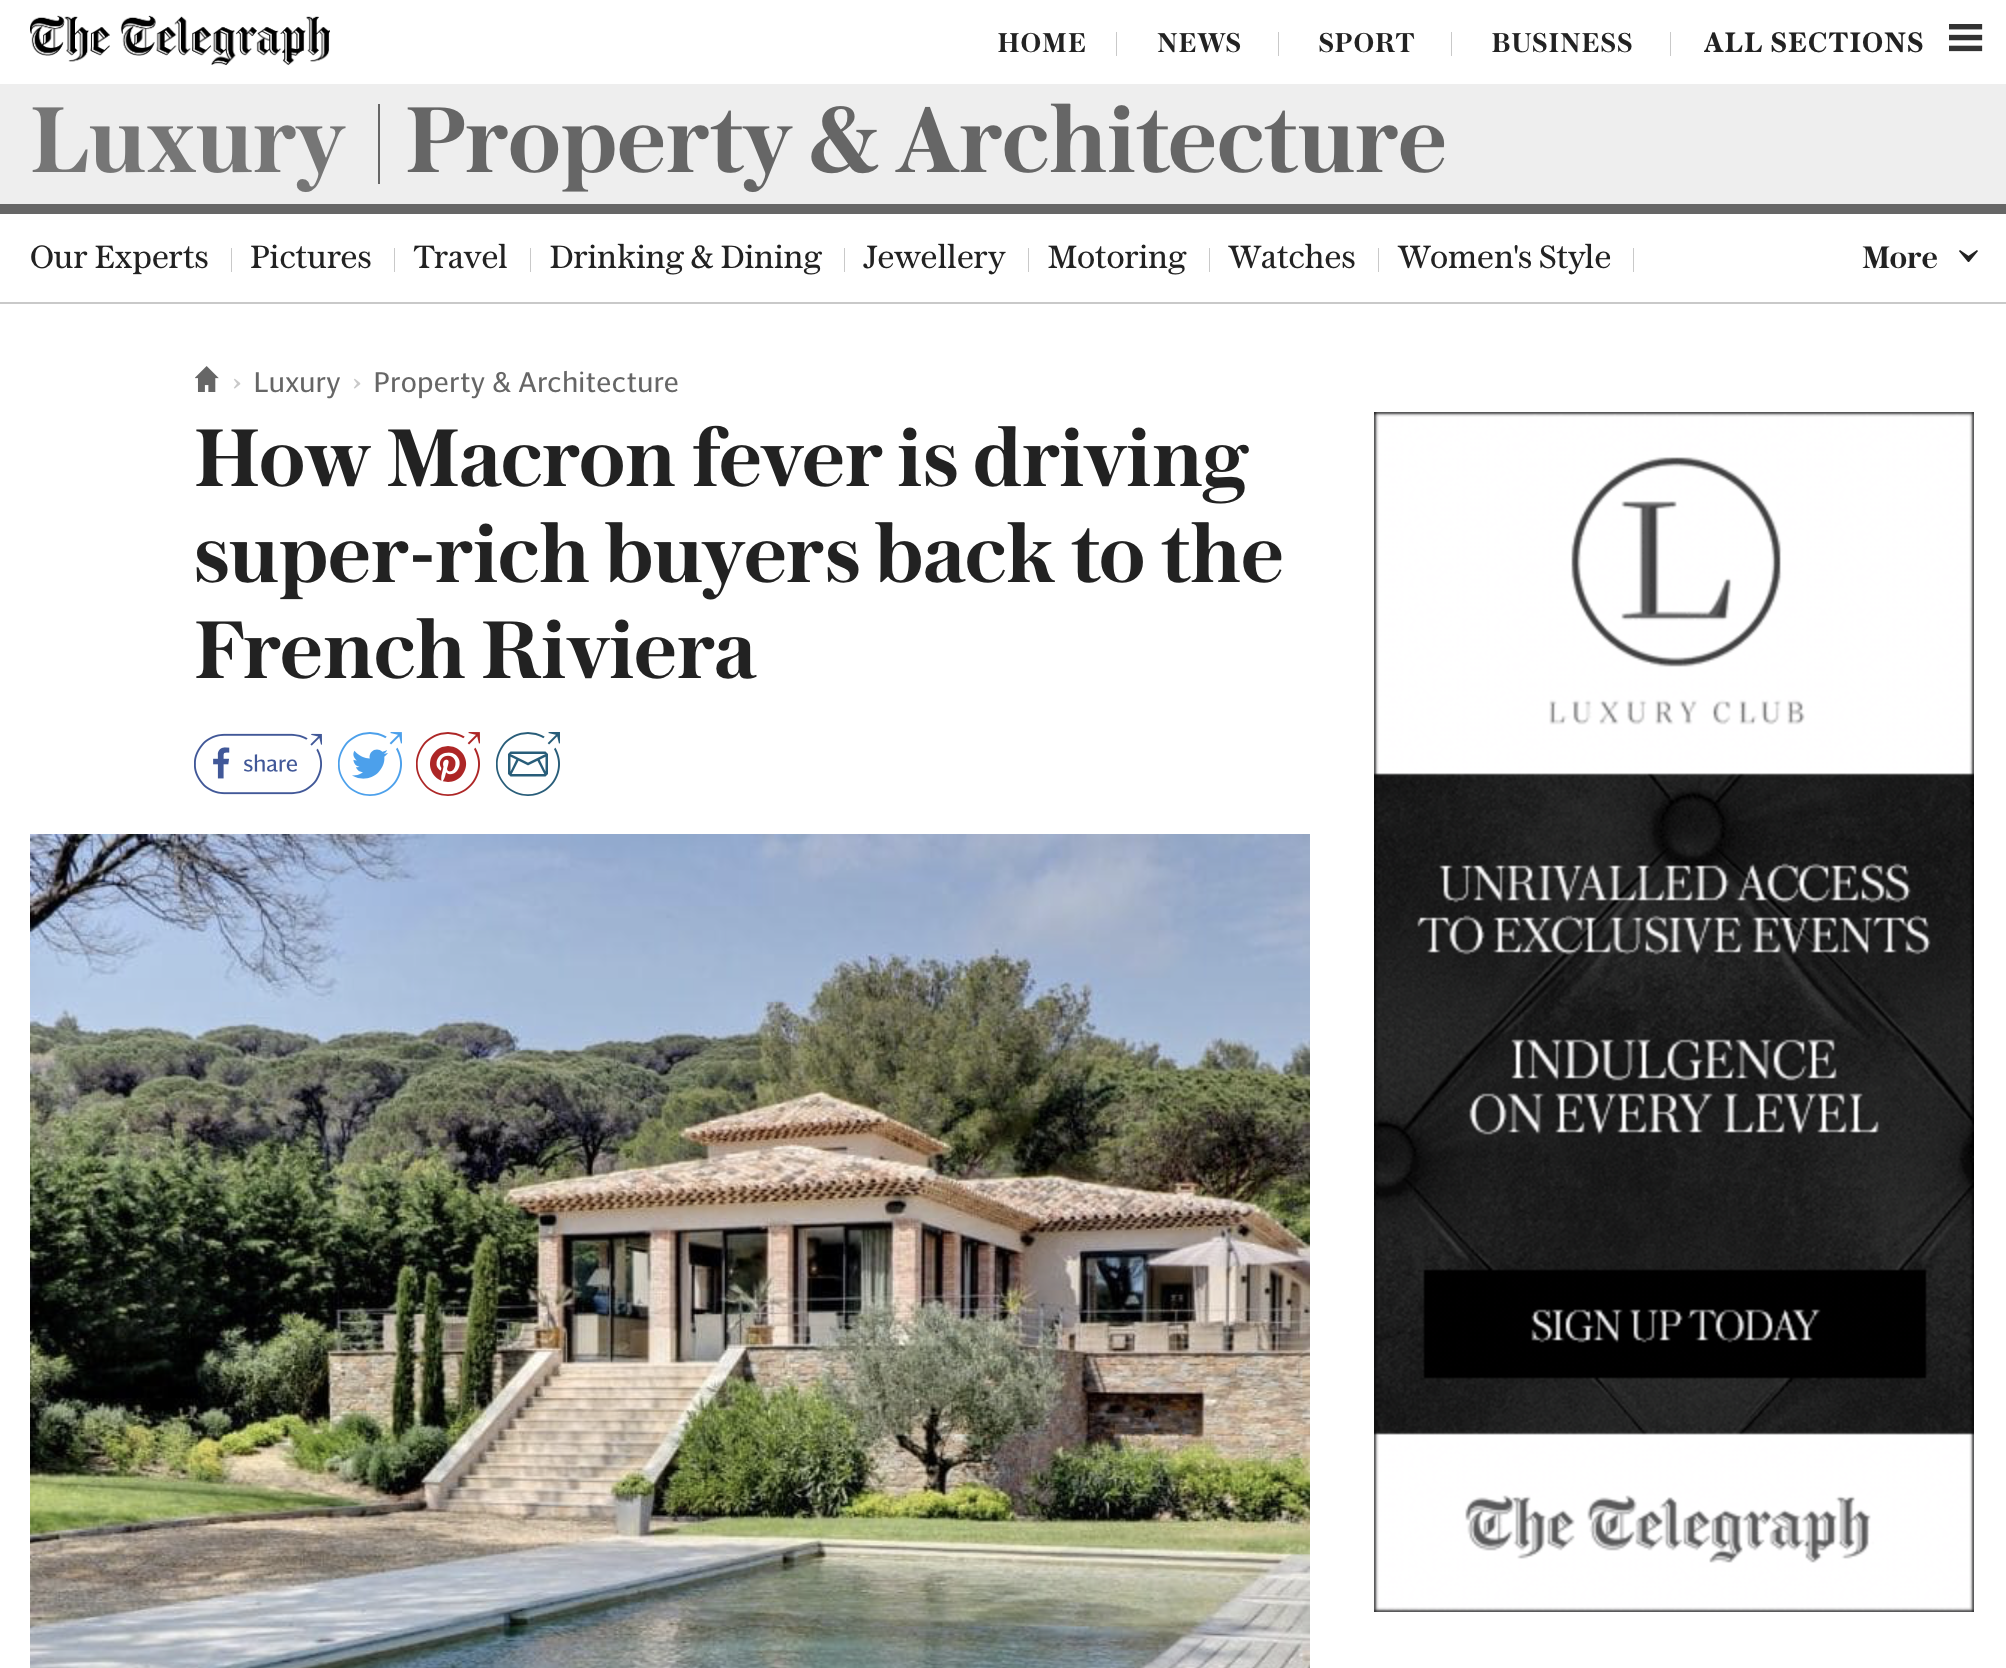 The Telegraph – How Macron fever is driving super-rich buyers back to the French Riviera